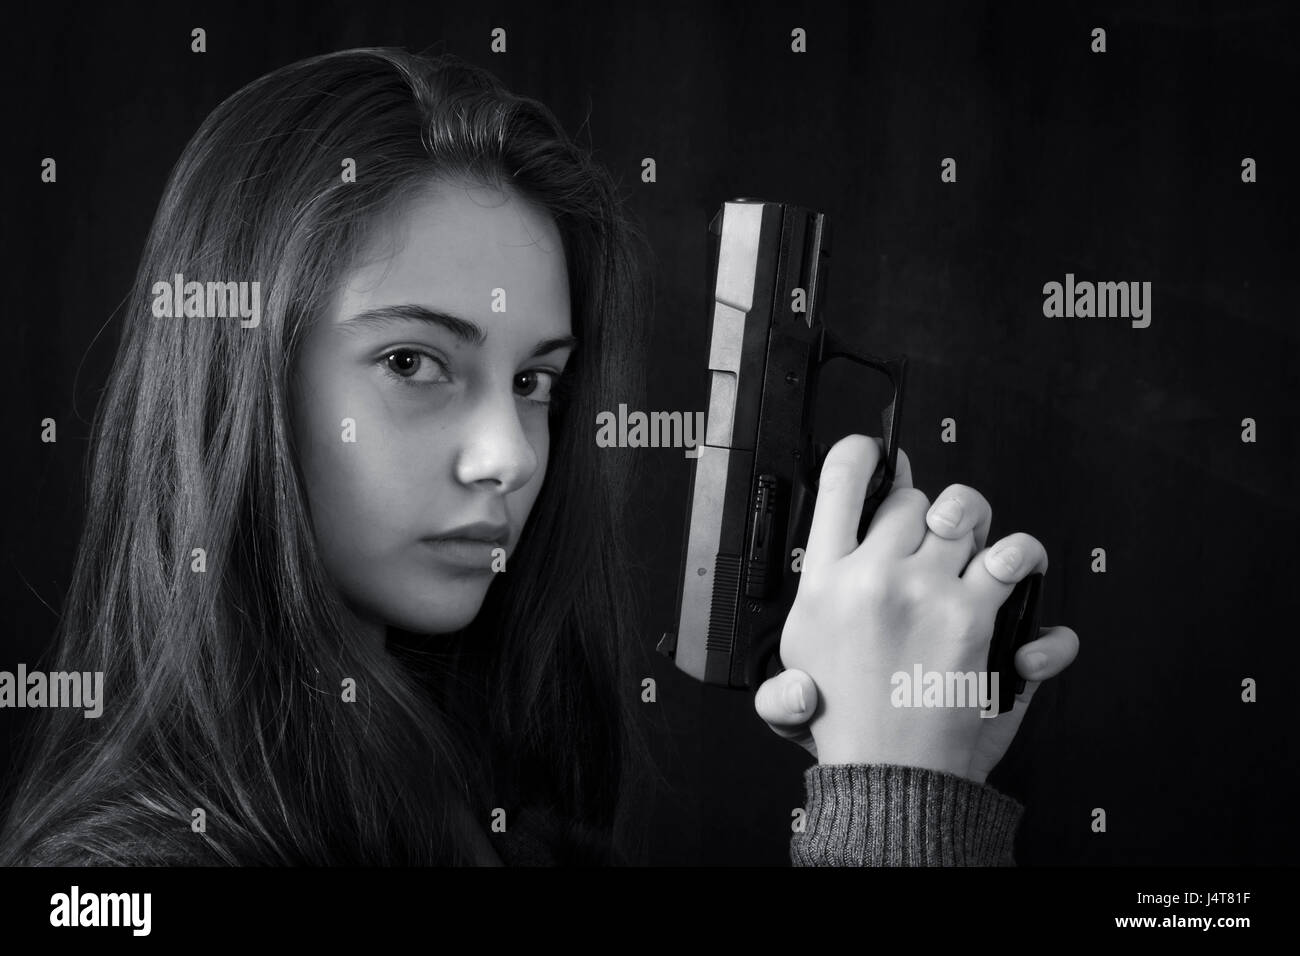 Monochrome close up emotional portrait of young beautiful girl with a gun Stock Photo